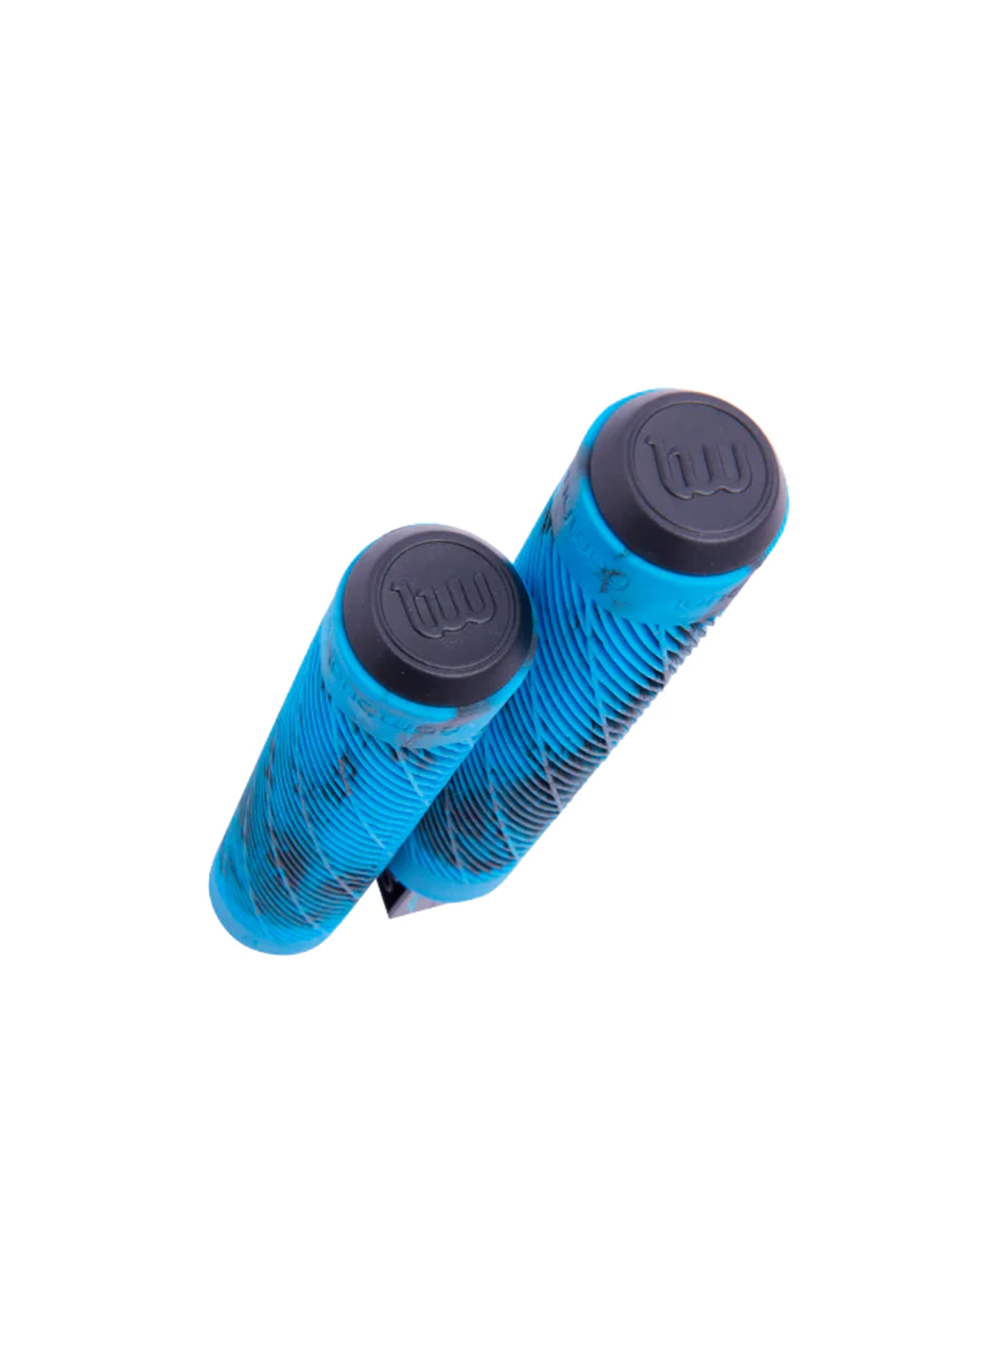 PUÑOS GRIP LONGWAY TWISTER COLORS